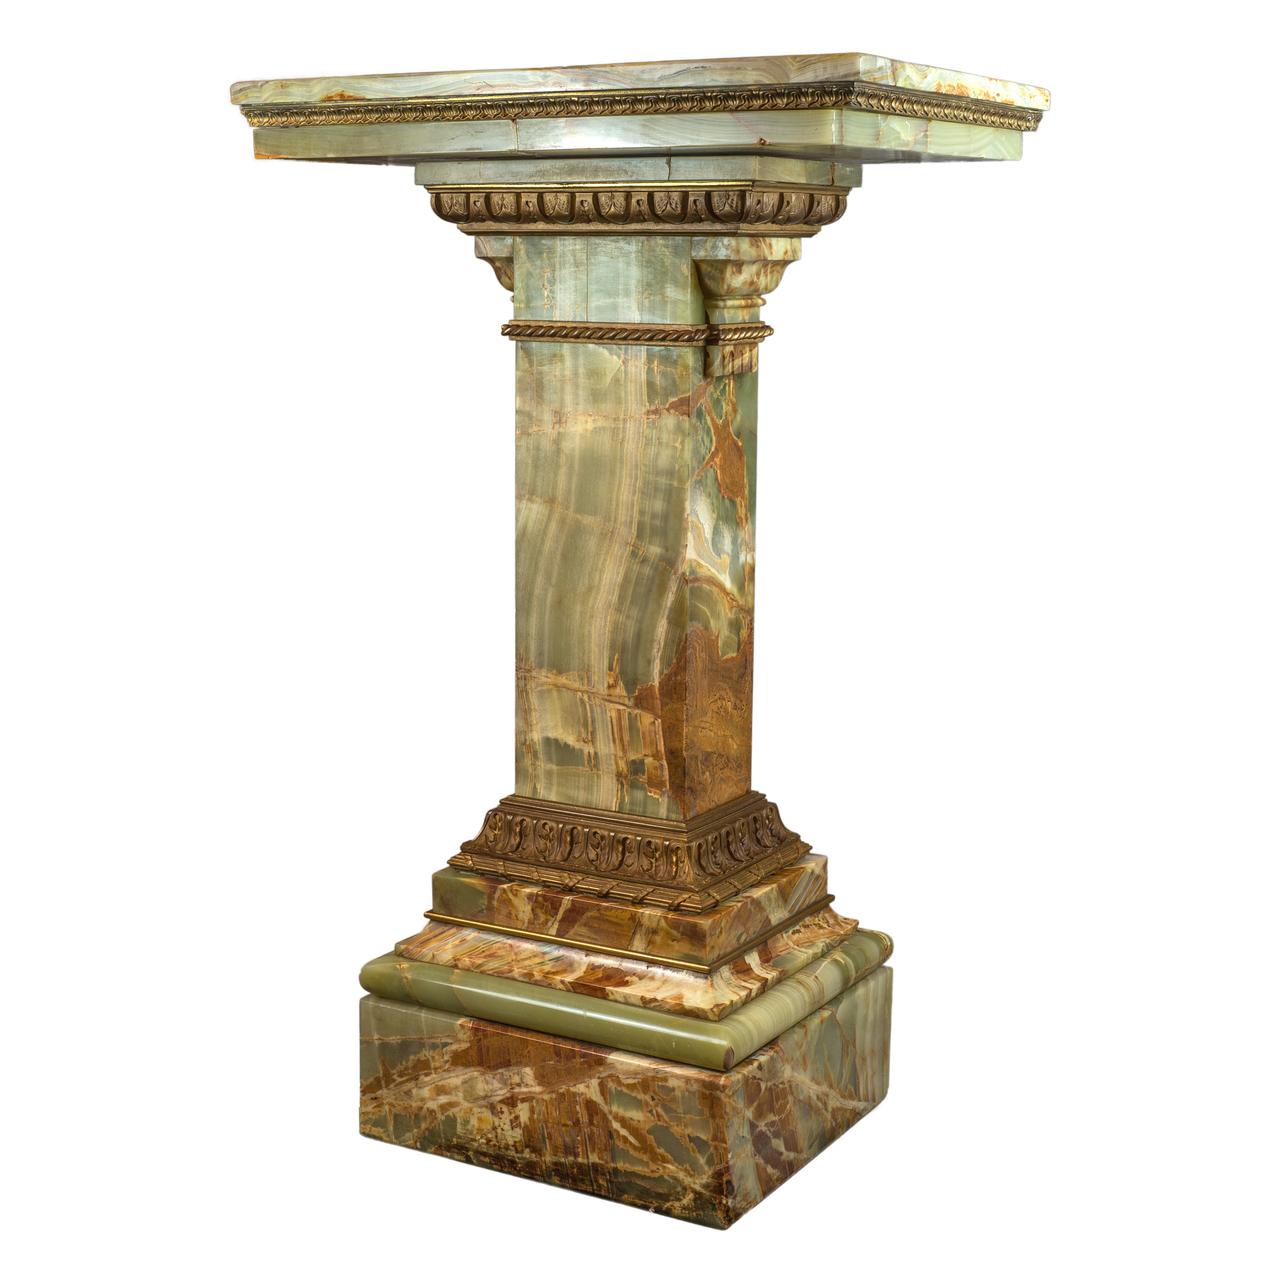 This fine pedestal is of rectangular revolving top section with a fine gilt-bronze mounted capitol, acanthus and anthemion devices. The pedestal is raised on a square section base.
Origin: French
Date: 19th century
Dimension: 42 in x 26 1/2 in x